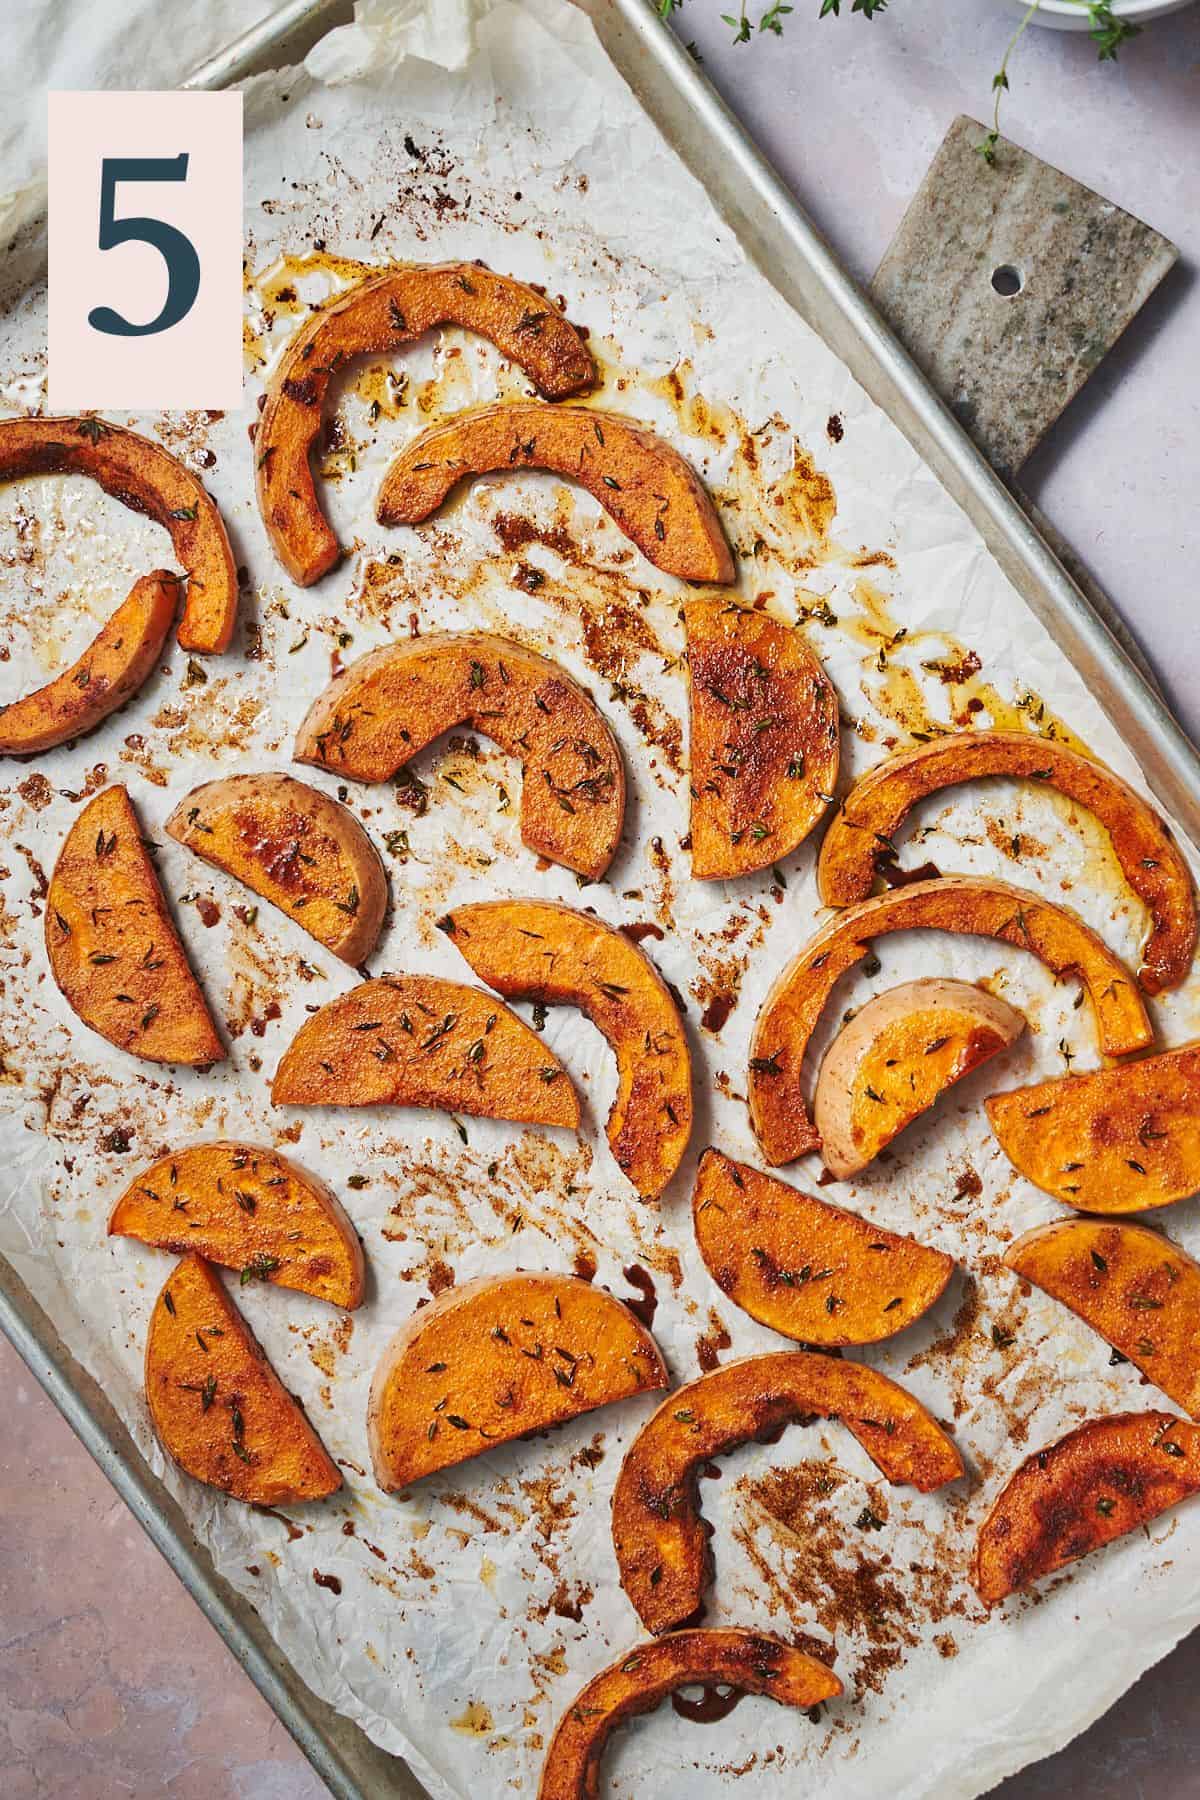 Roasted butternut squash pieces on a parchment lined baking sheet with thyme and cinnamon.